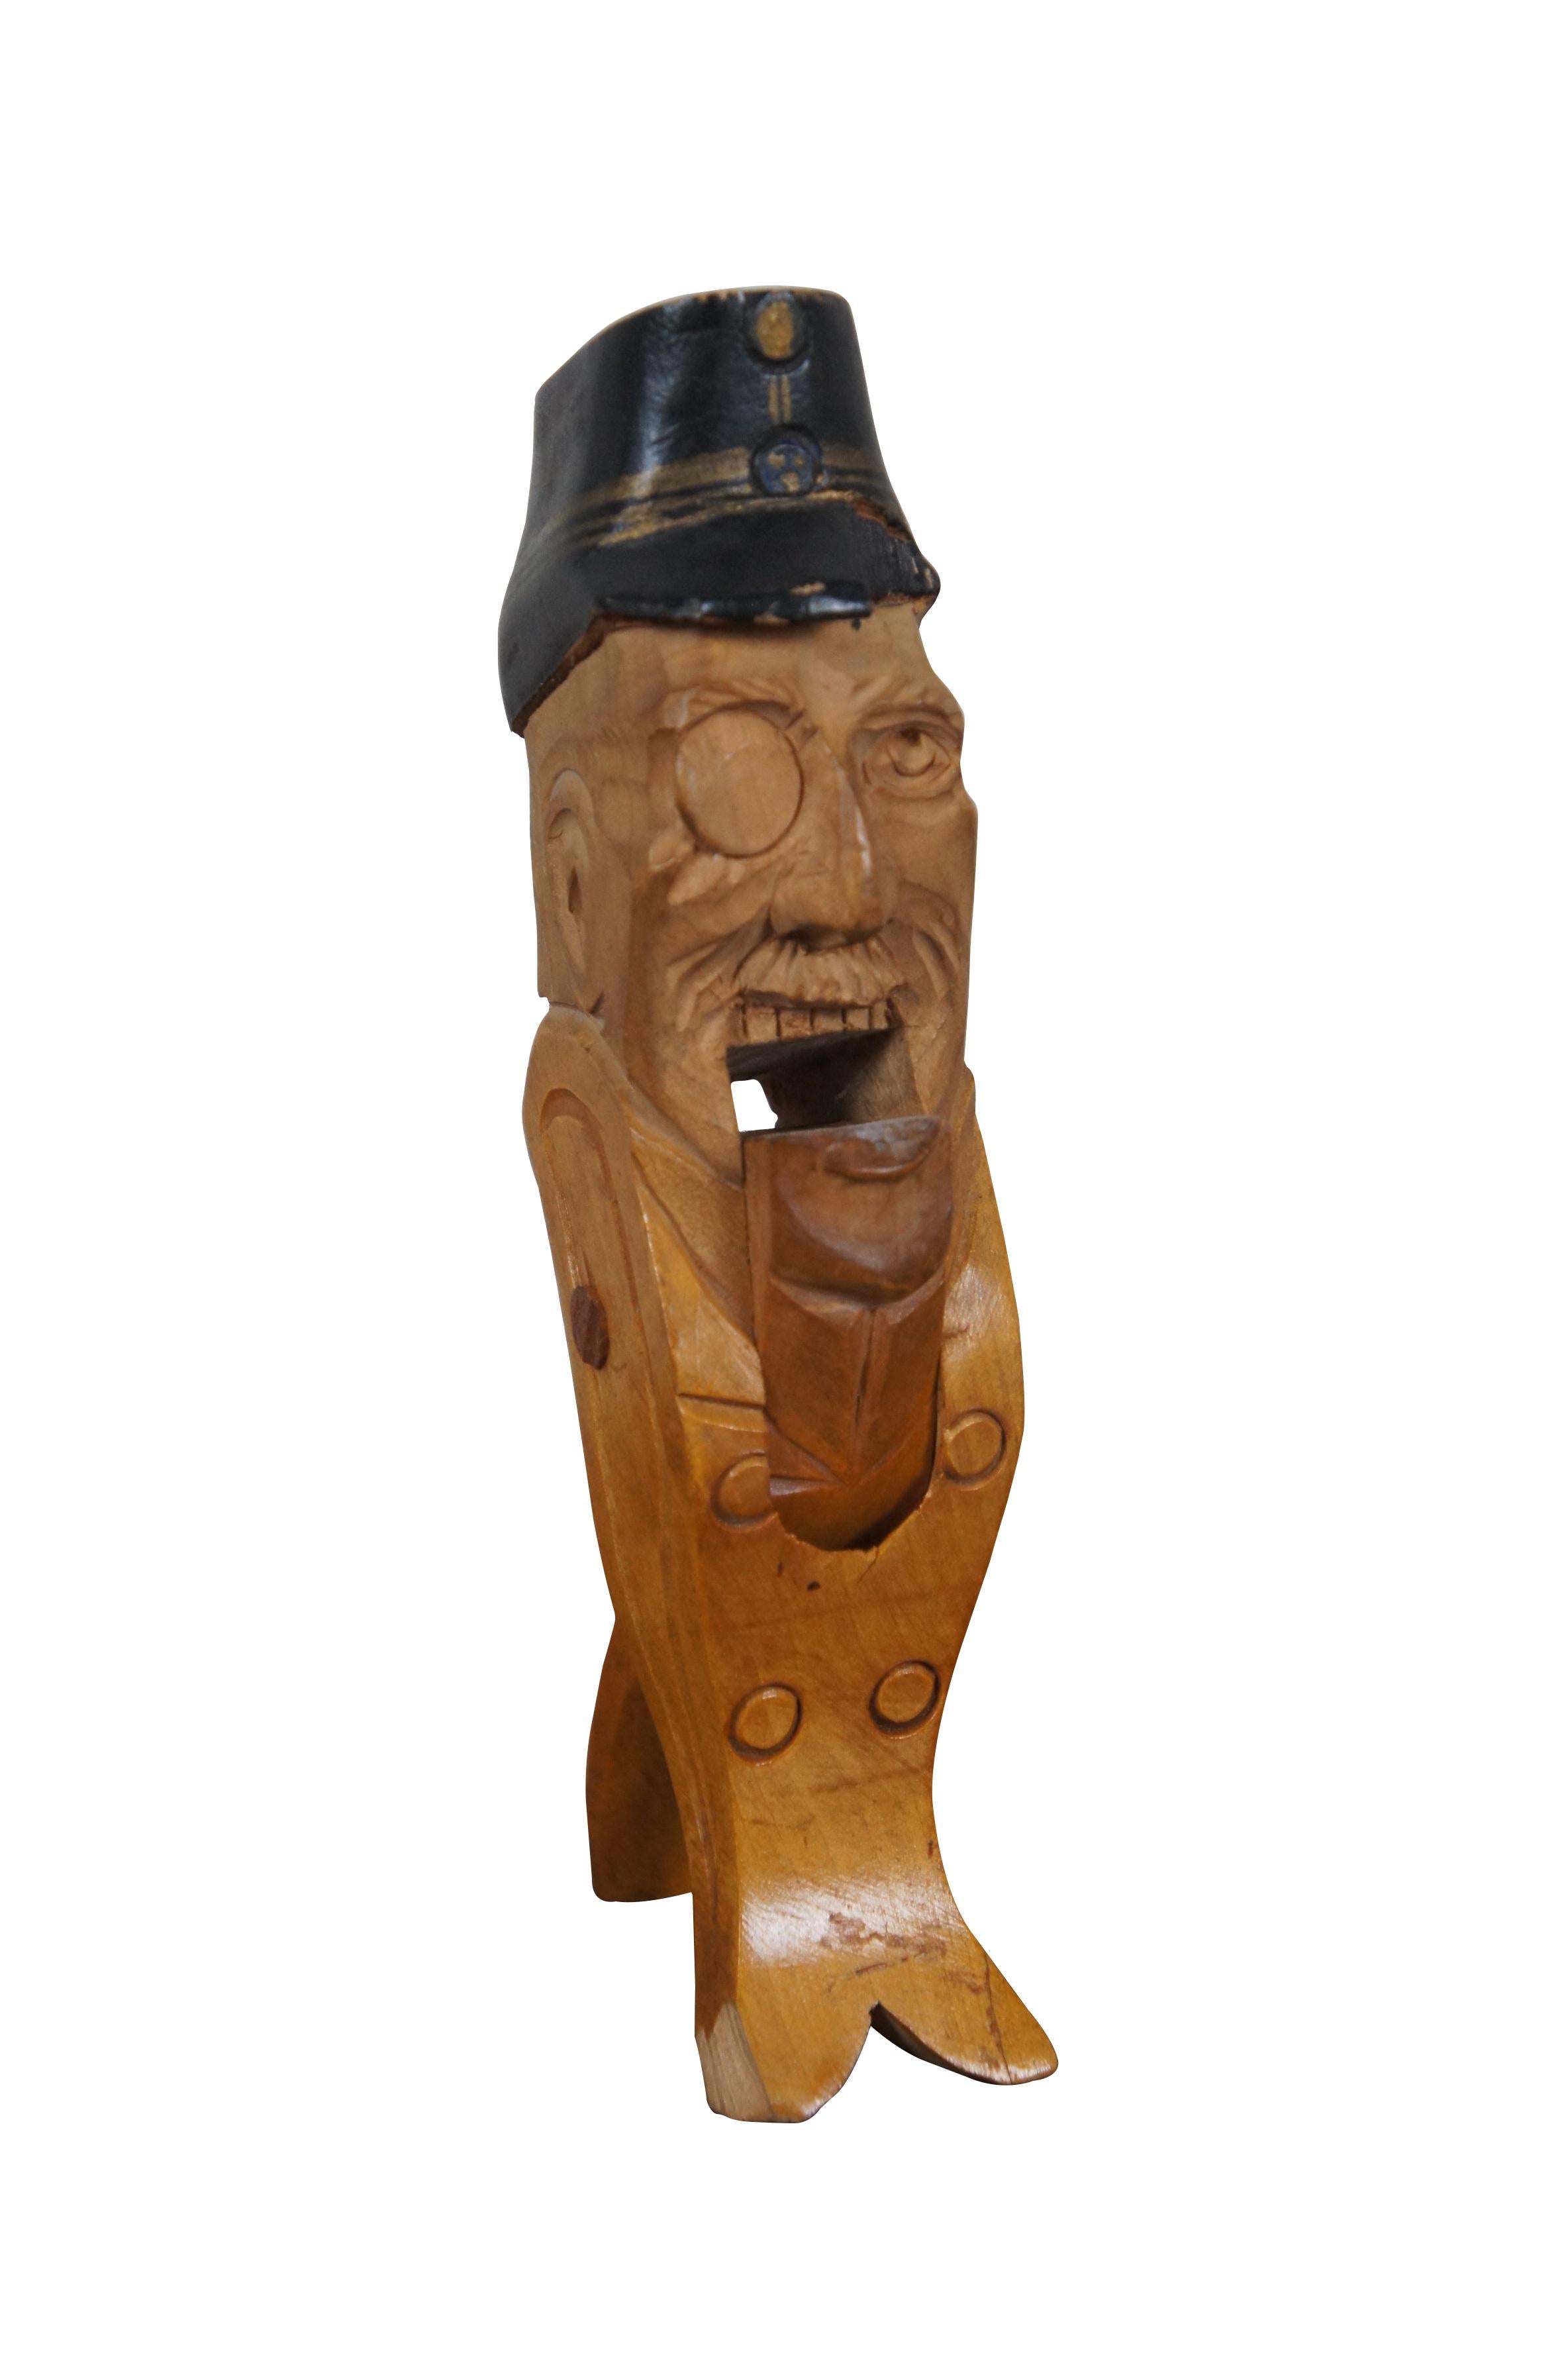 Antique Erik Molin (Swedish 1855-1933) hand carved birch nut cracker (Nötknäckare).  Depicts an elderly man with moustache and monacle / eyepatch, wearing a double breasted coat and military style cap. The base of his torso terminates in a fish